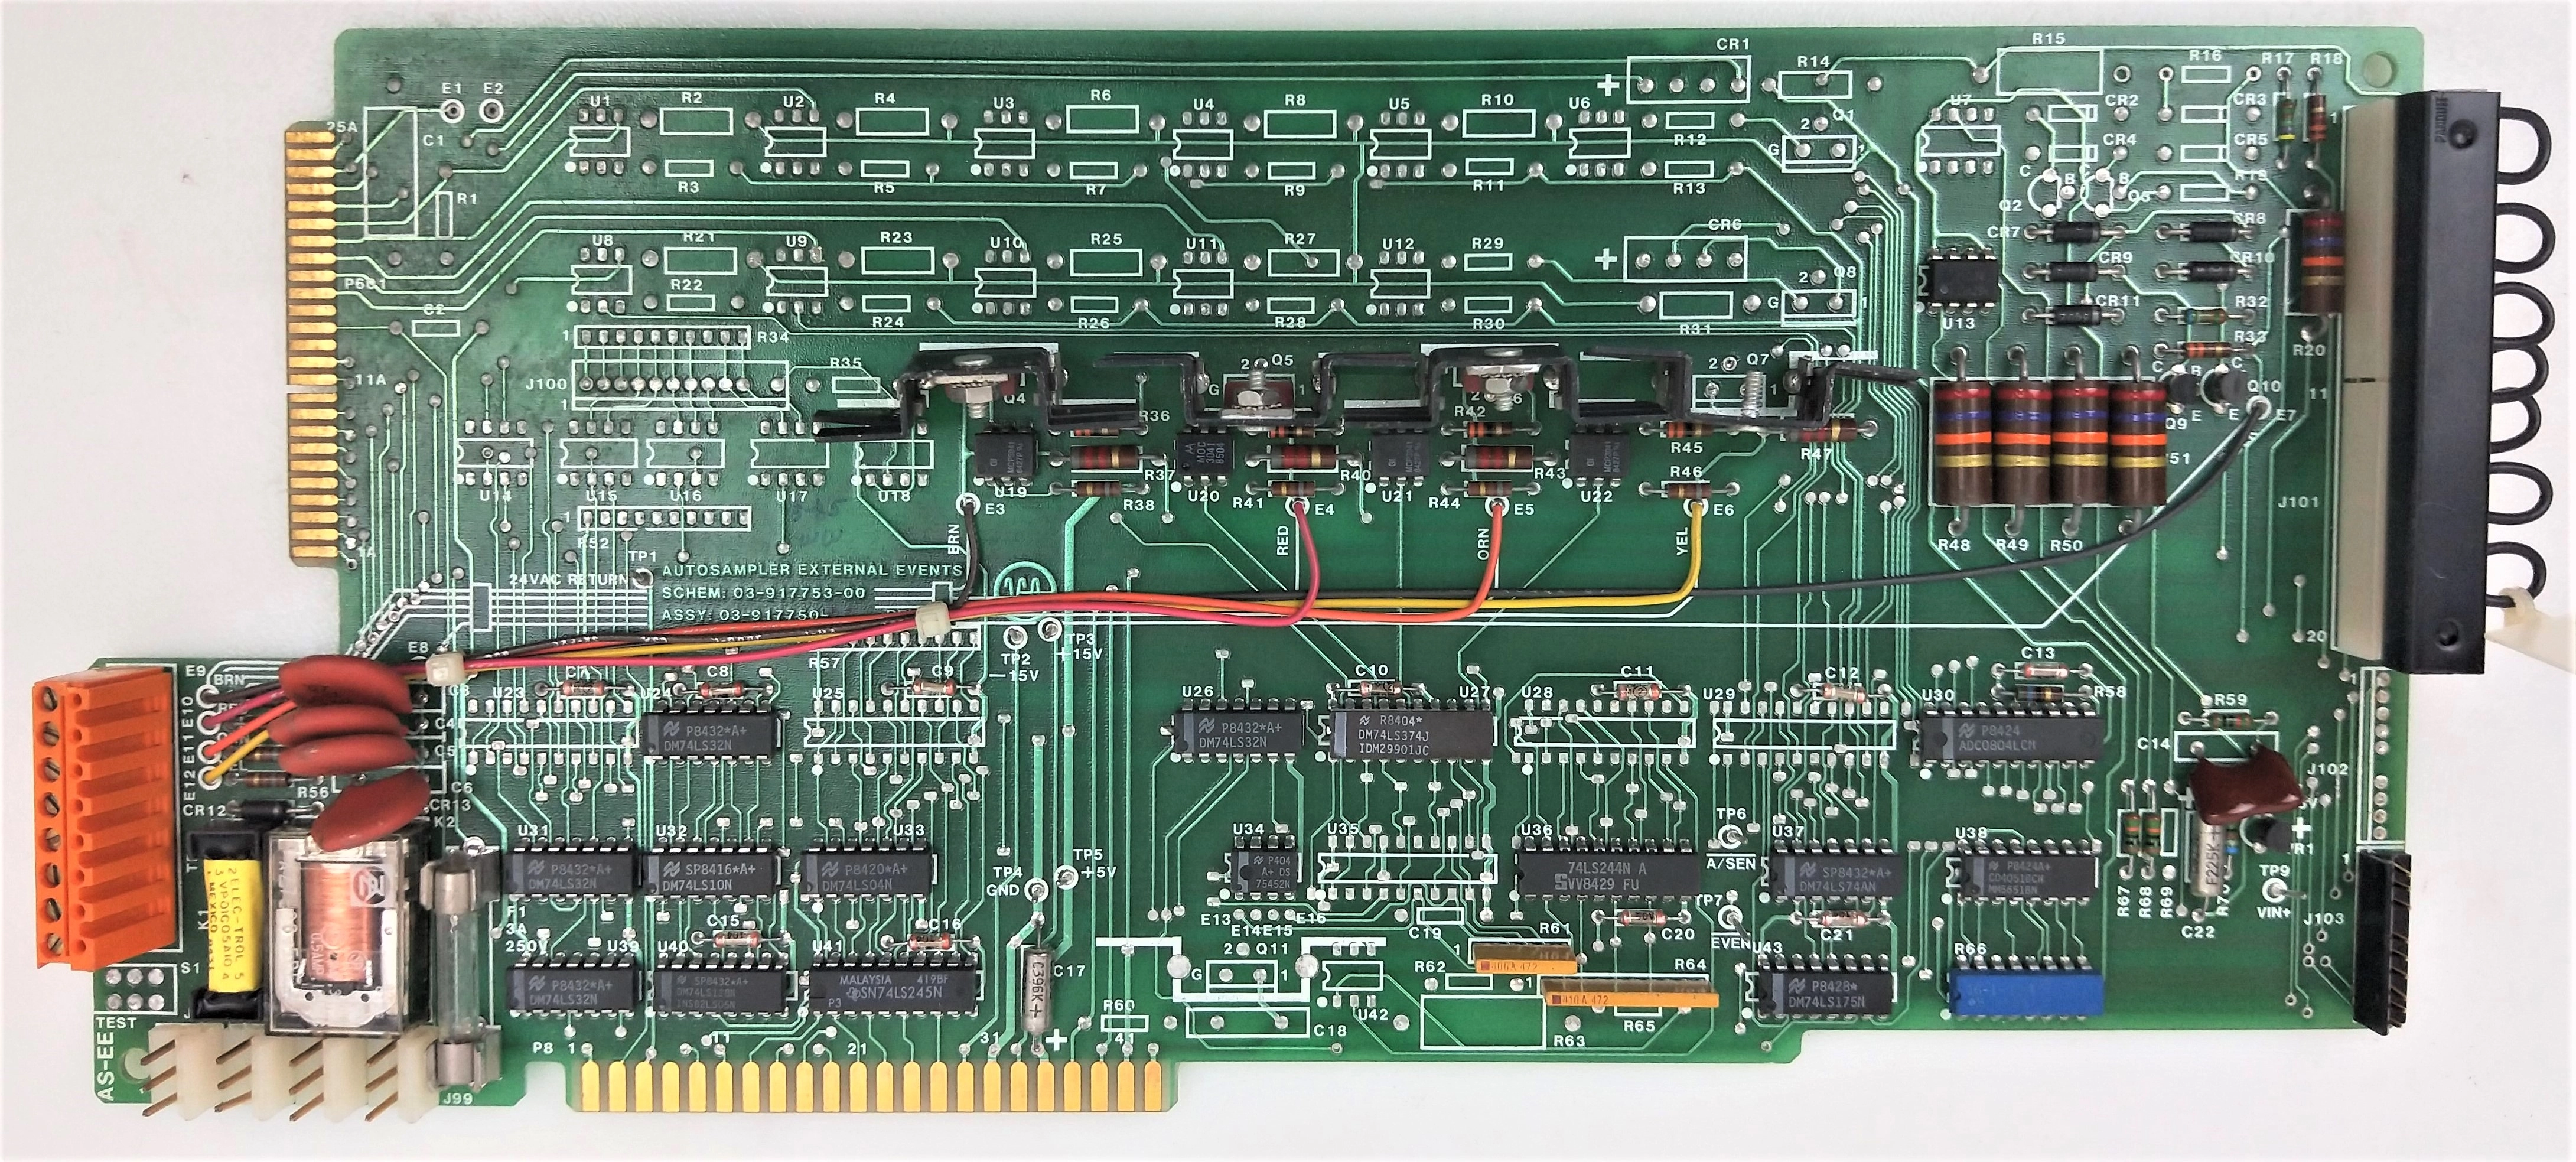 Varian 03-917750-00 PCB Board for Varian GC-Autosampler External Events